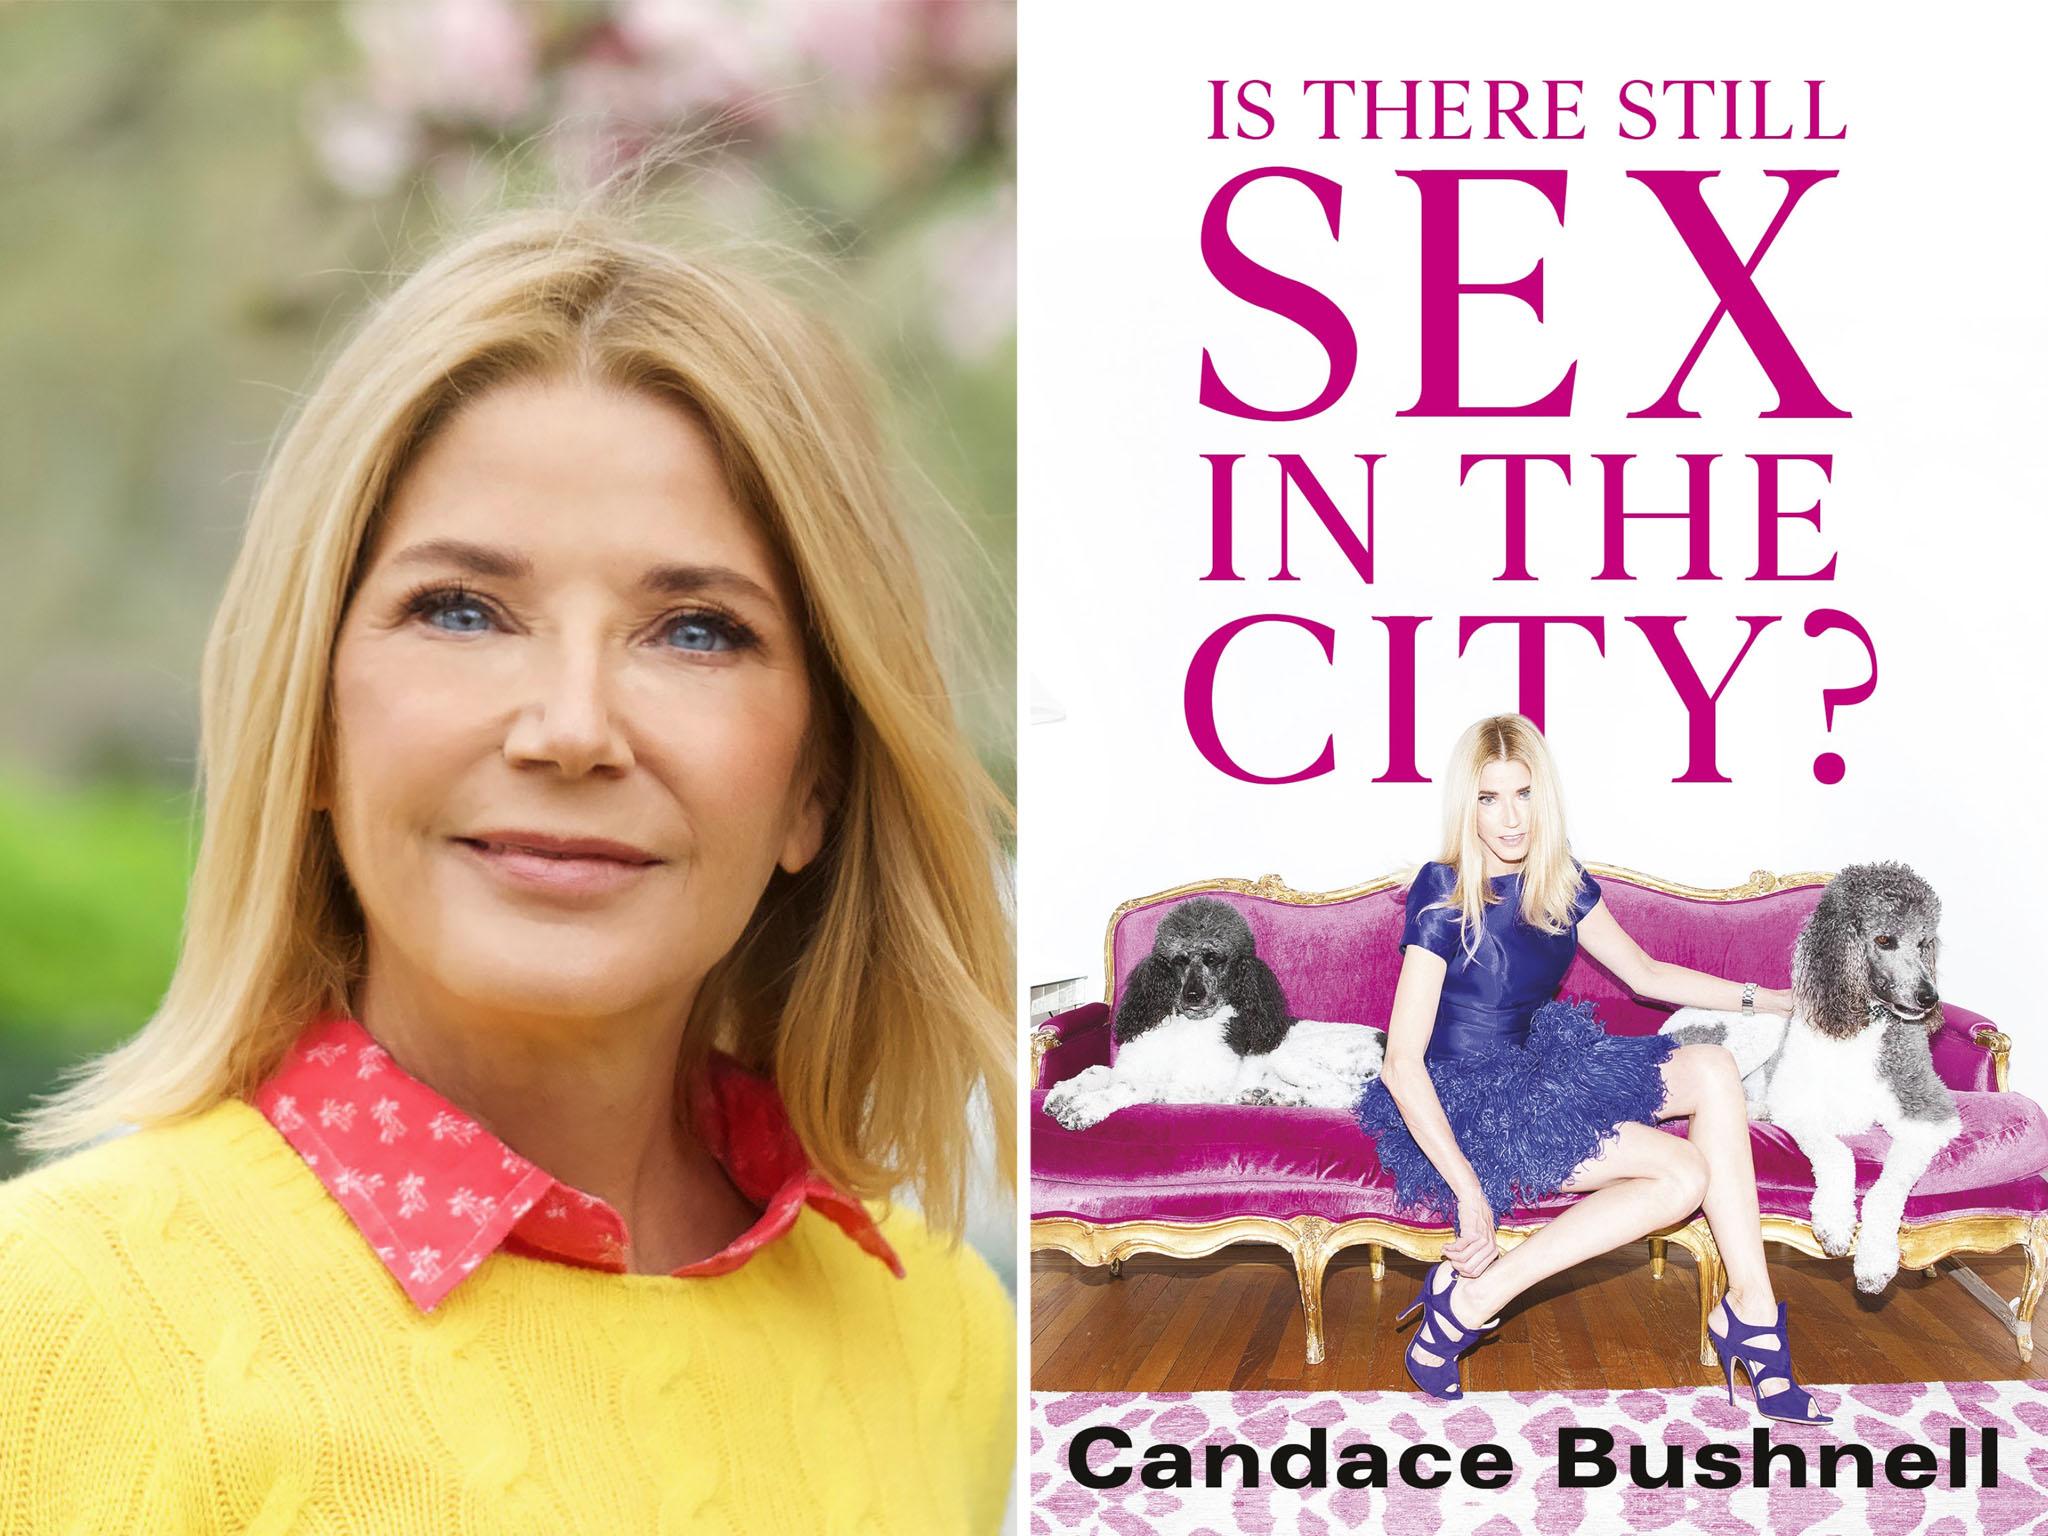 Is There Still Sex in the City? by Candace Bushnell, review Its disconcerting that this former sexpert sounds so out of touch The Independent The Independent photo